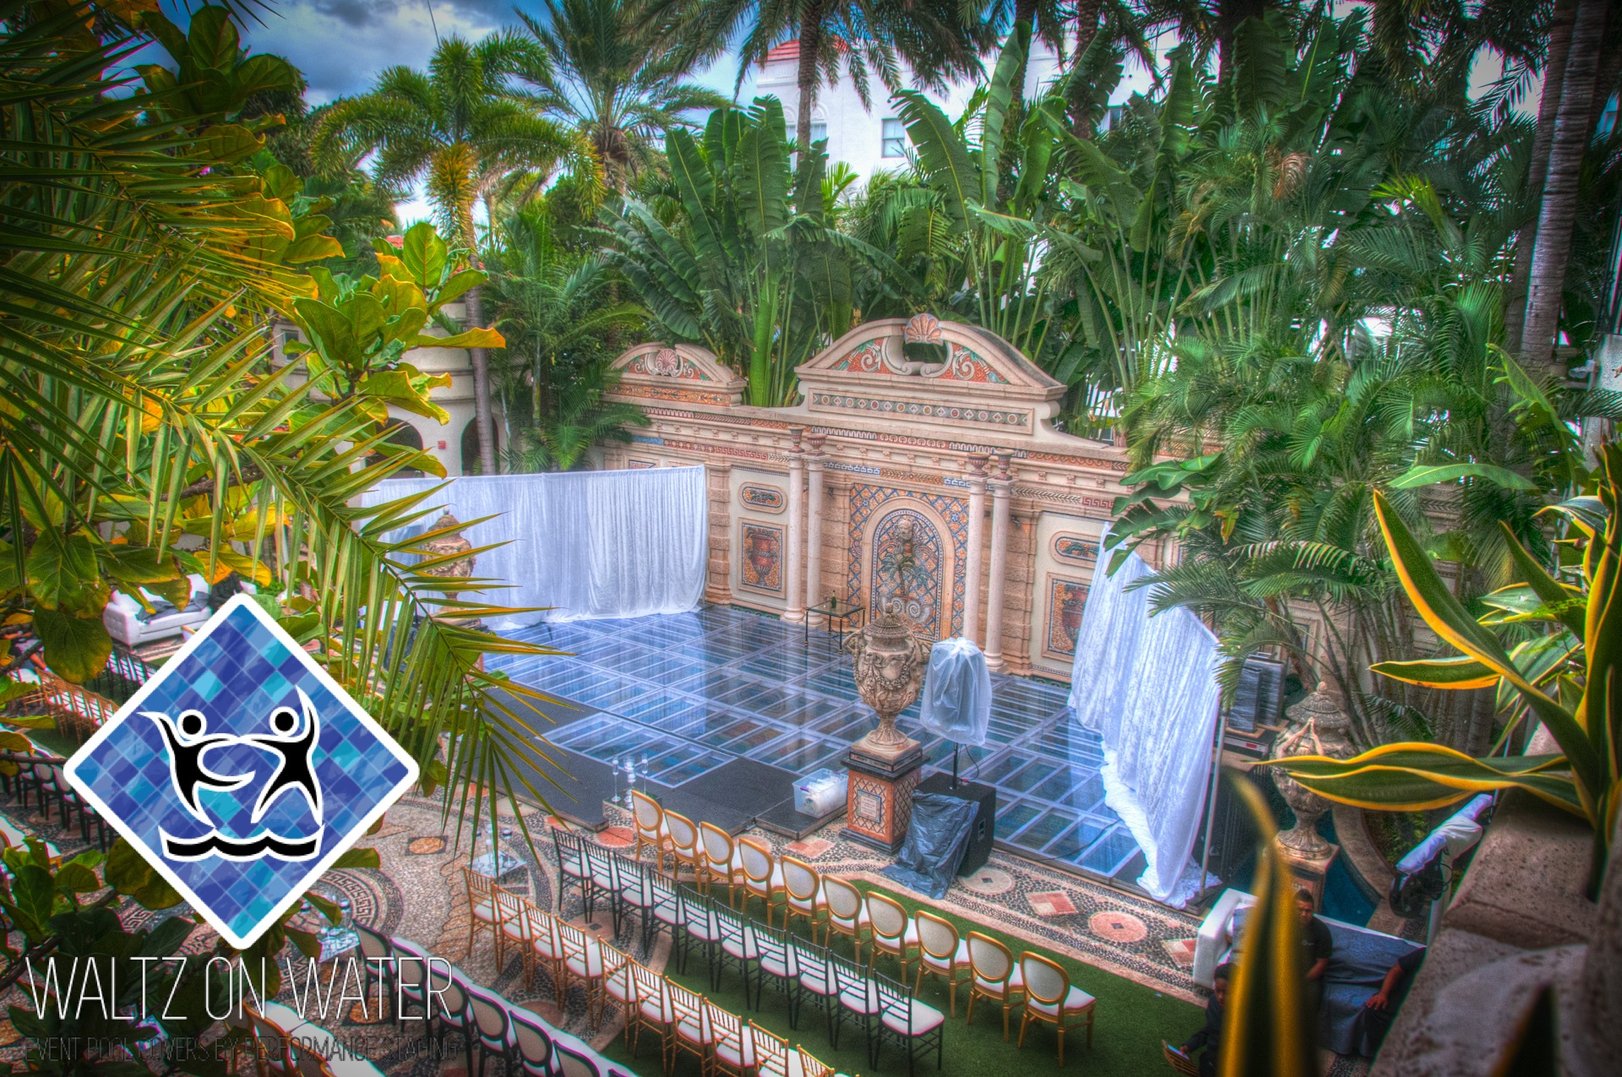 Waltz on Water by Performance Staging Pool cover at the former Versace Mansion, Villa Casa Casuarina